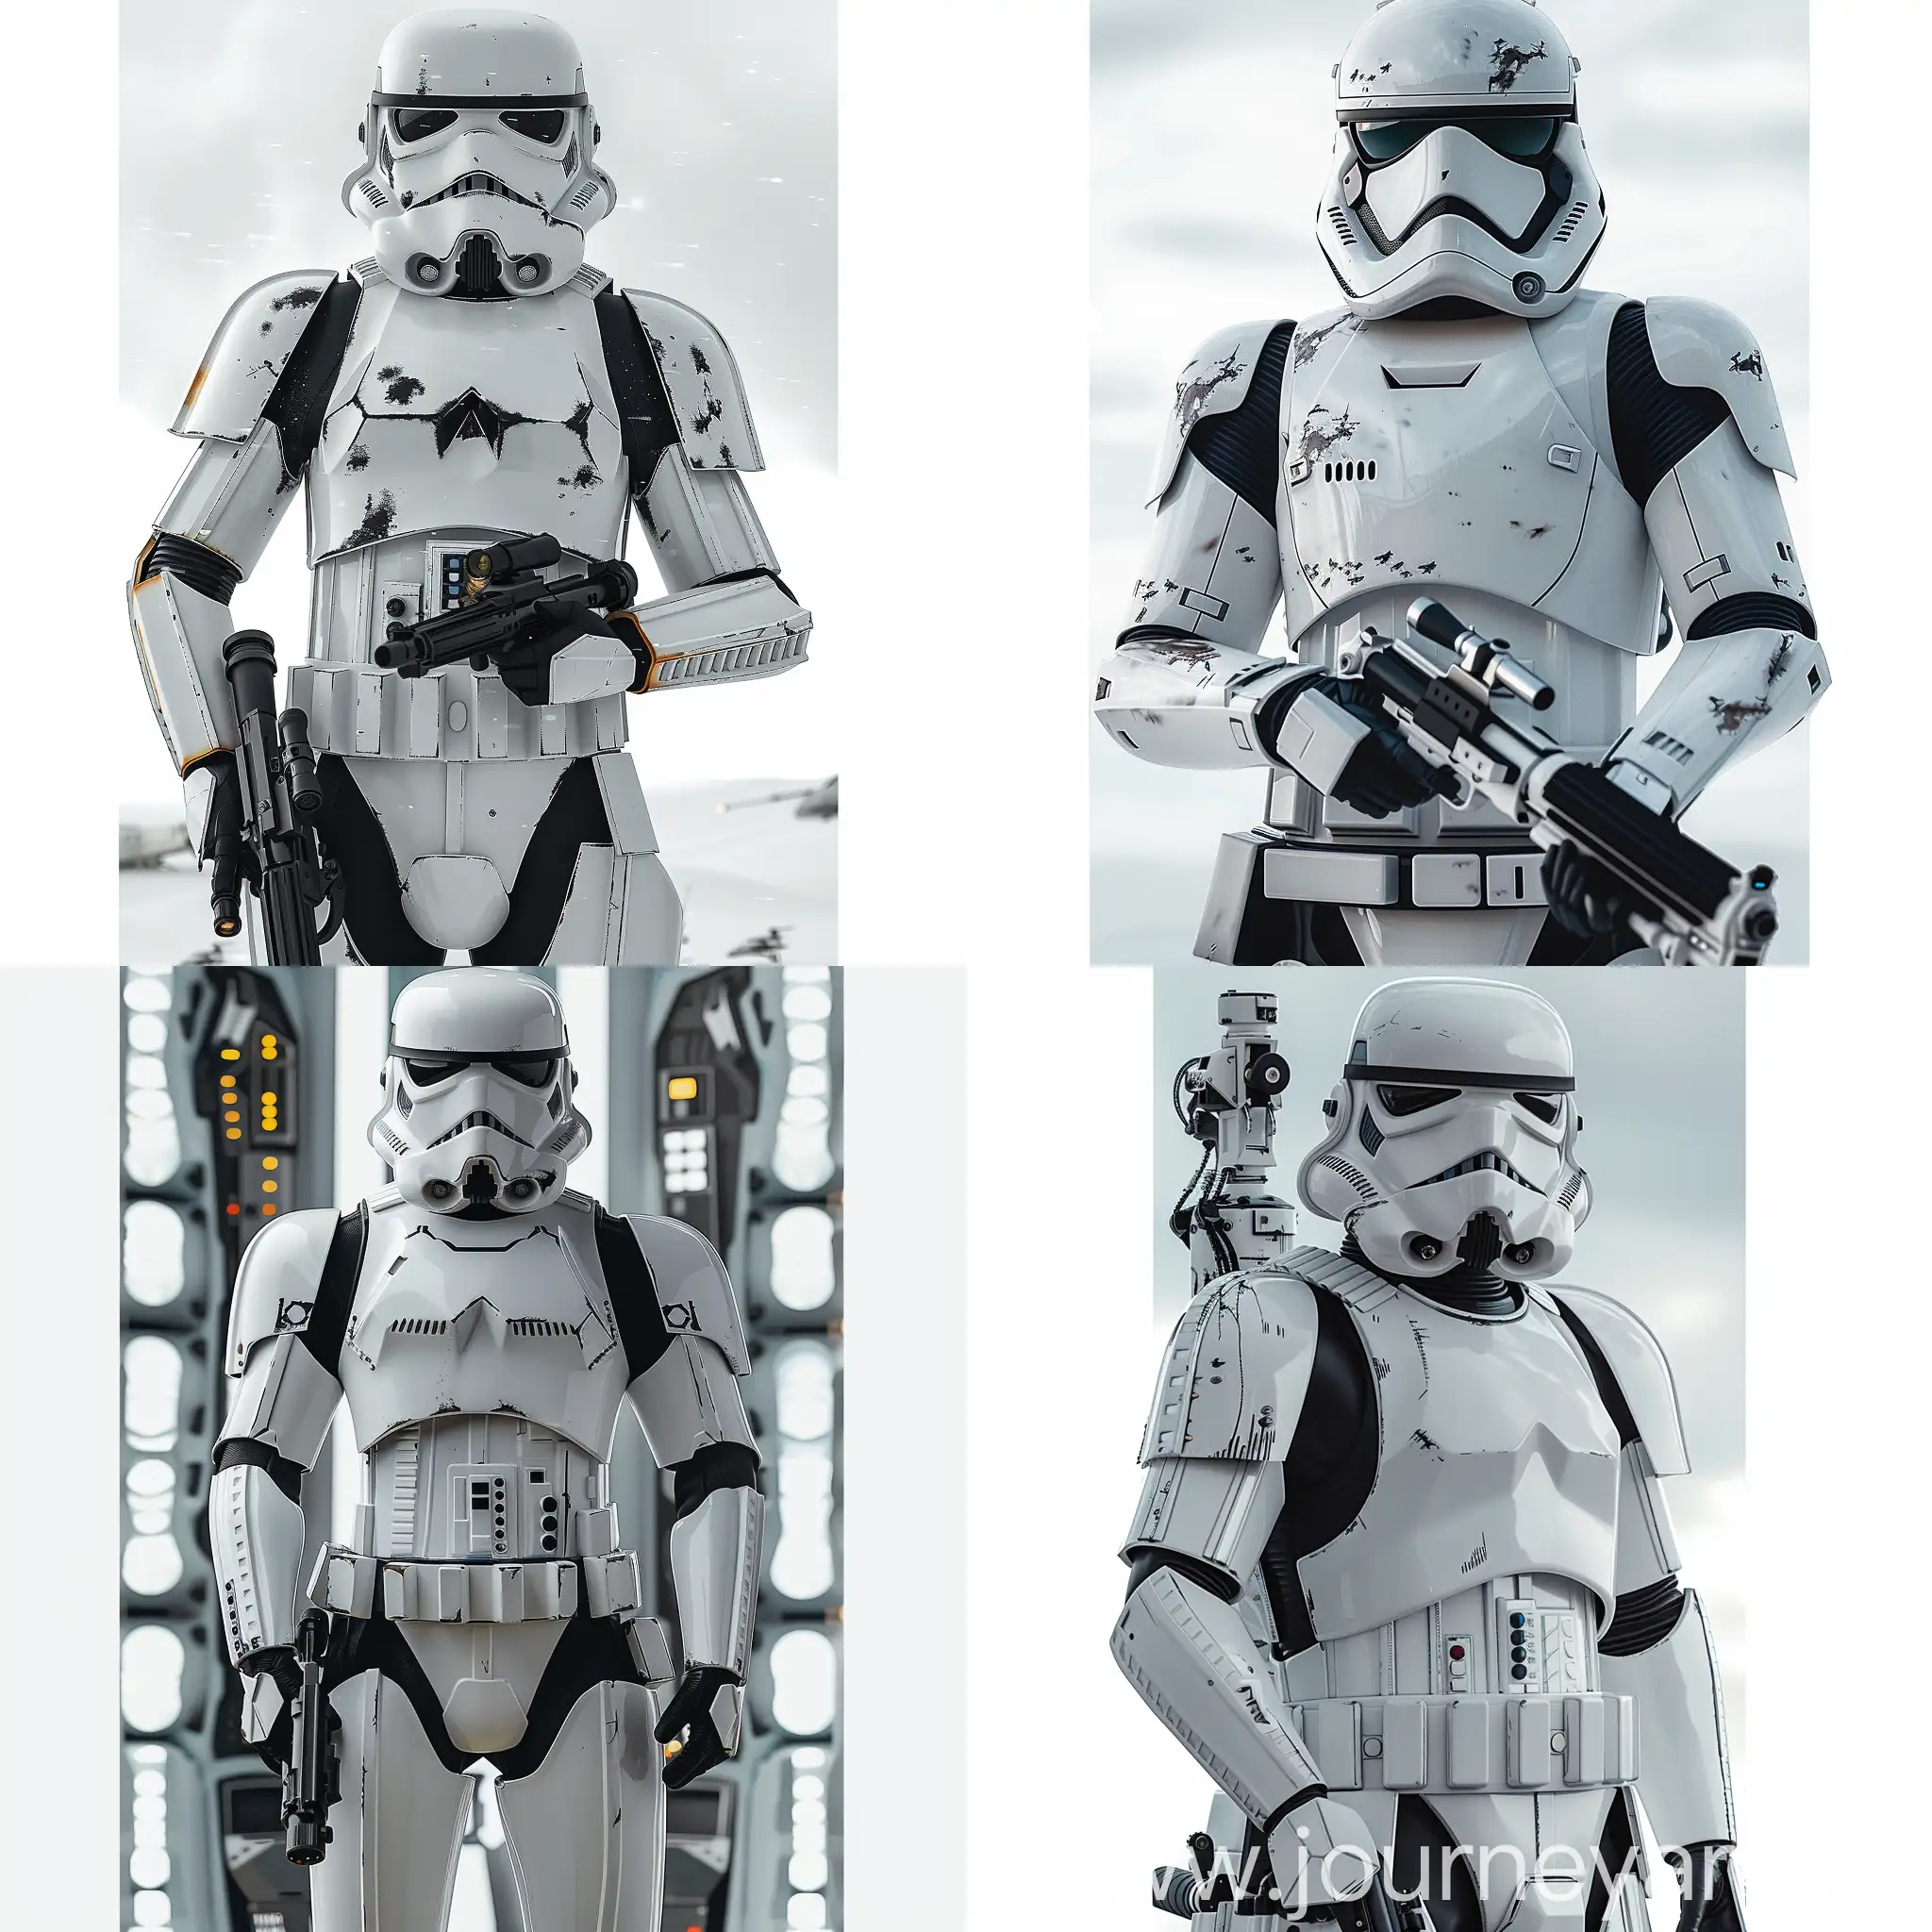 Futuristic-Star-Wars-Stormtrooper-with-SolarPowered-Armor